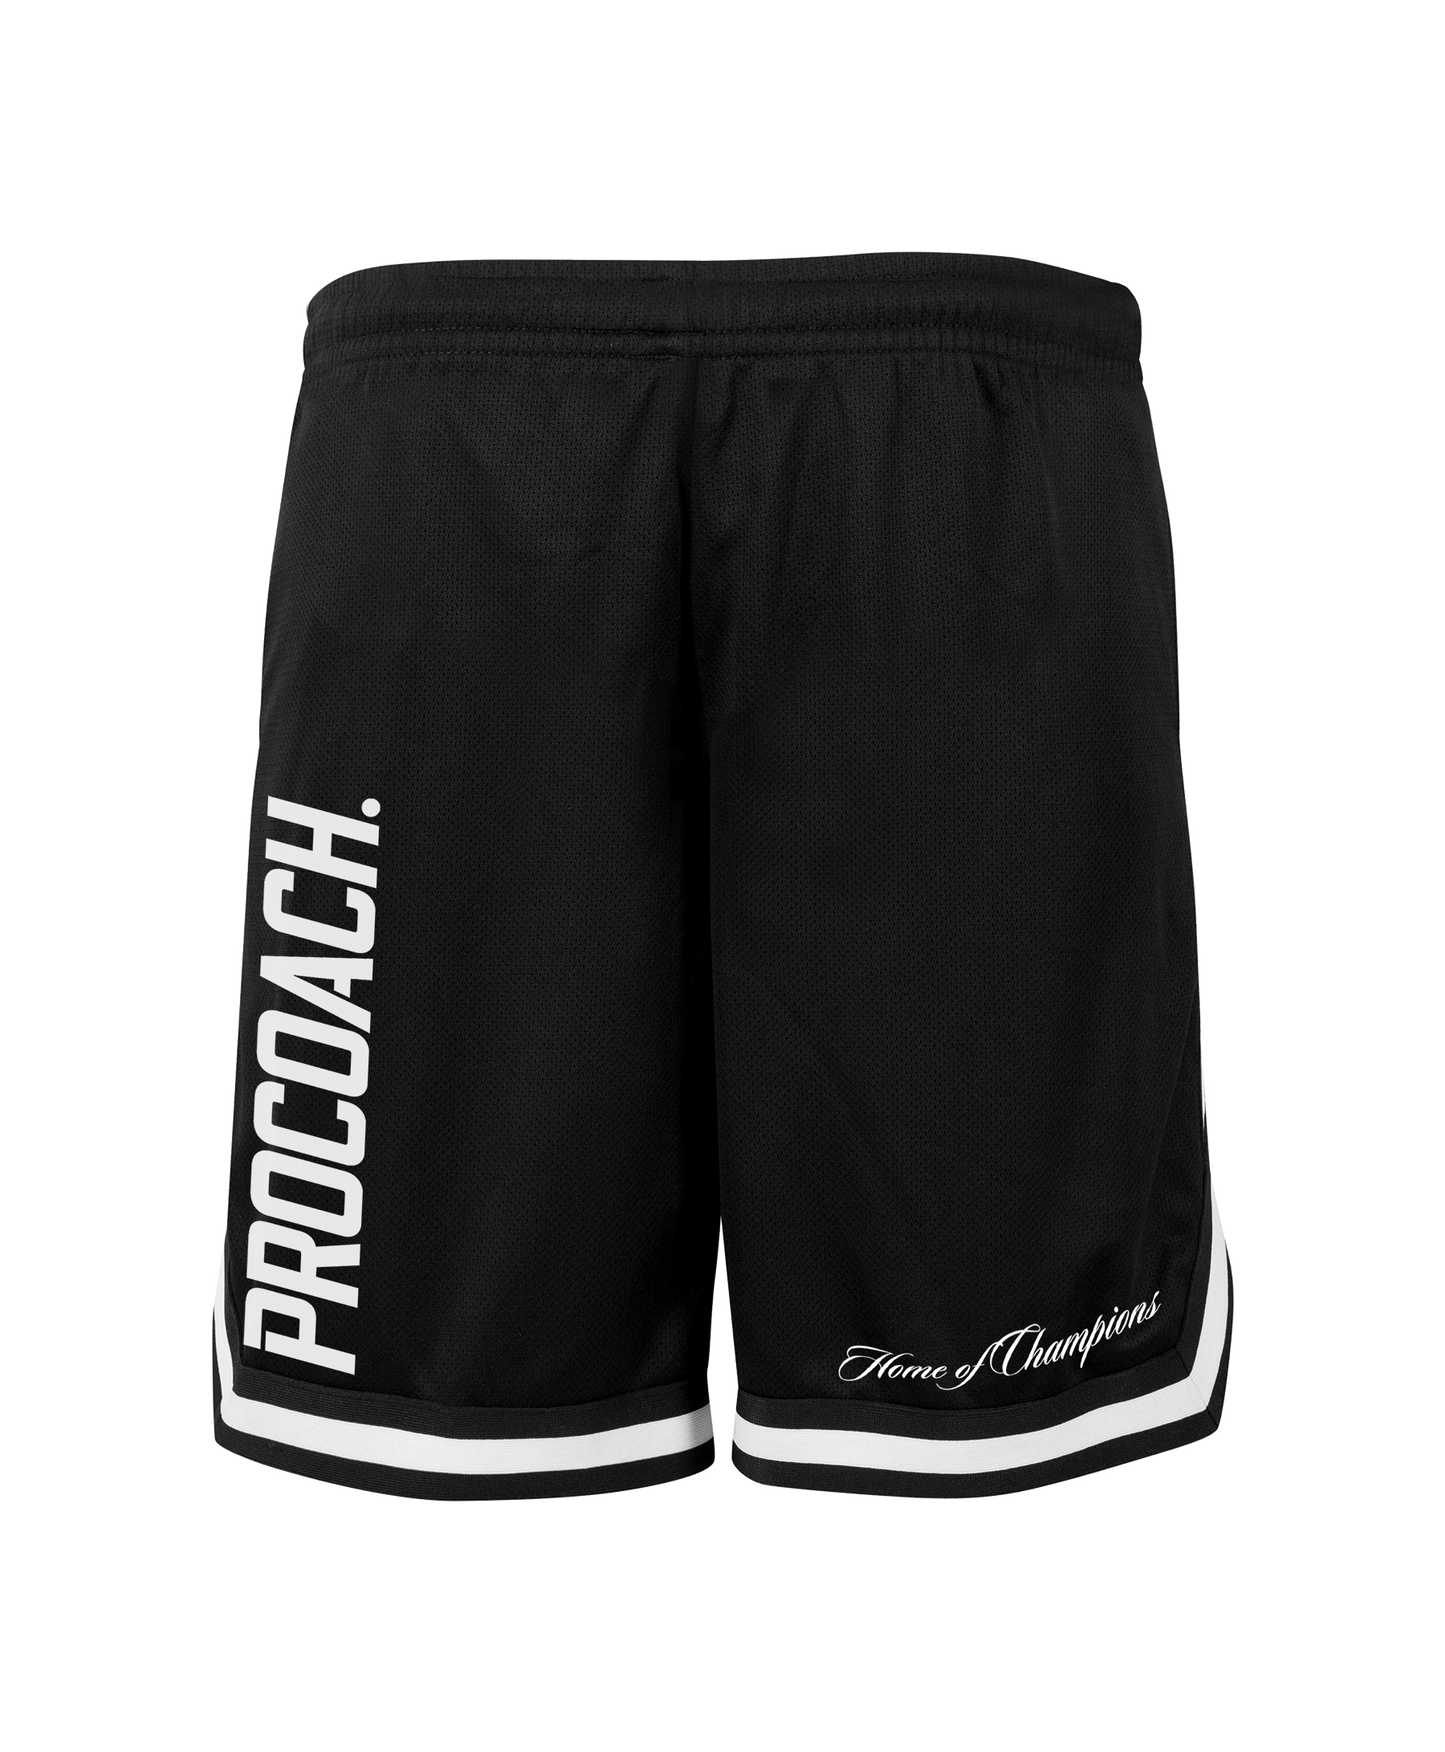 Home Of Champions ProCoach Gym Shorts